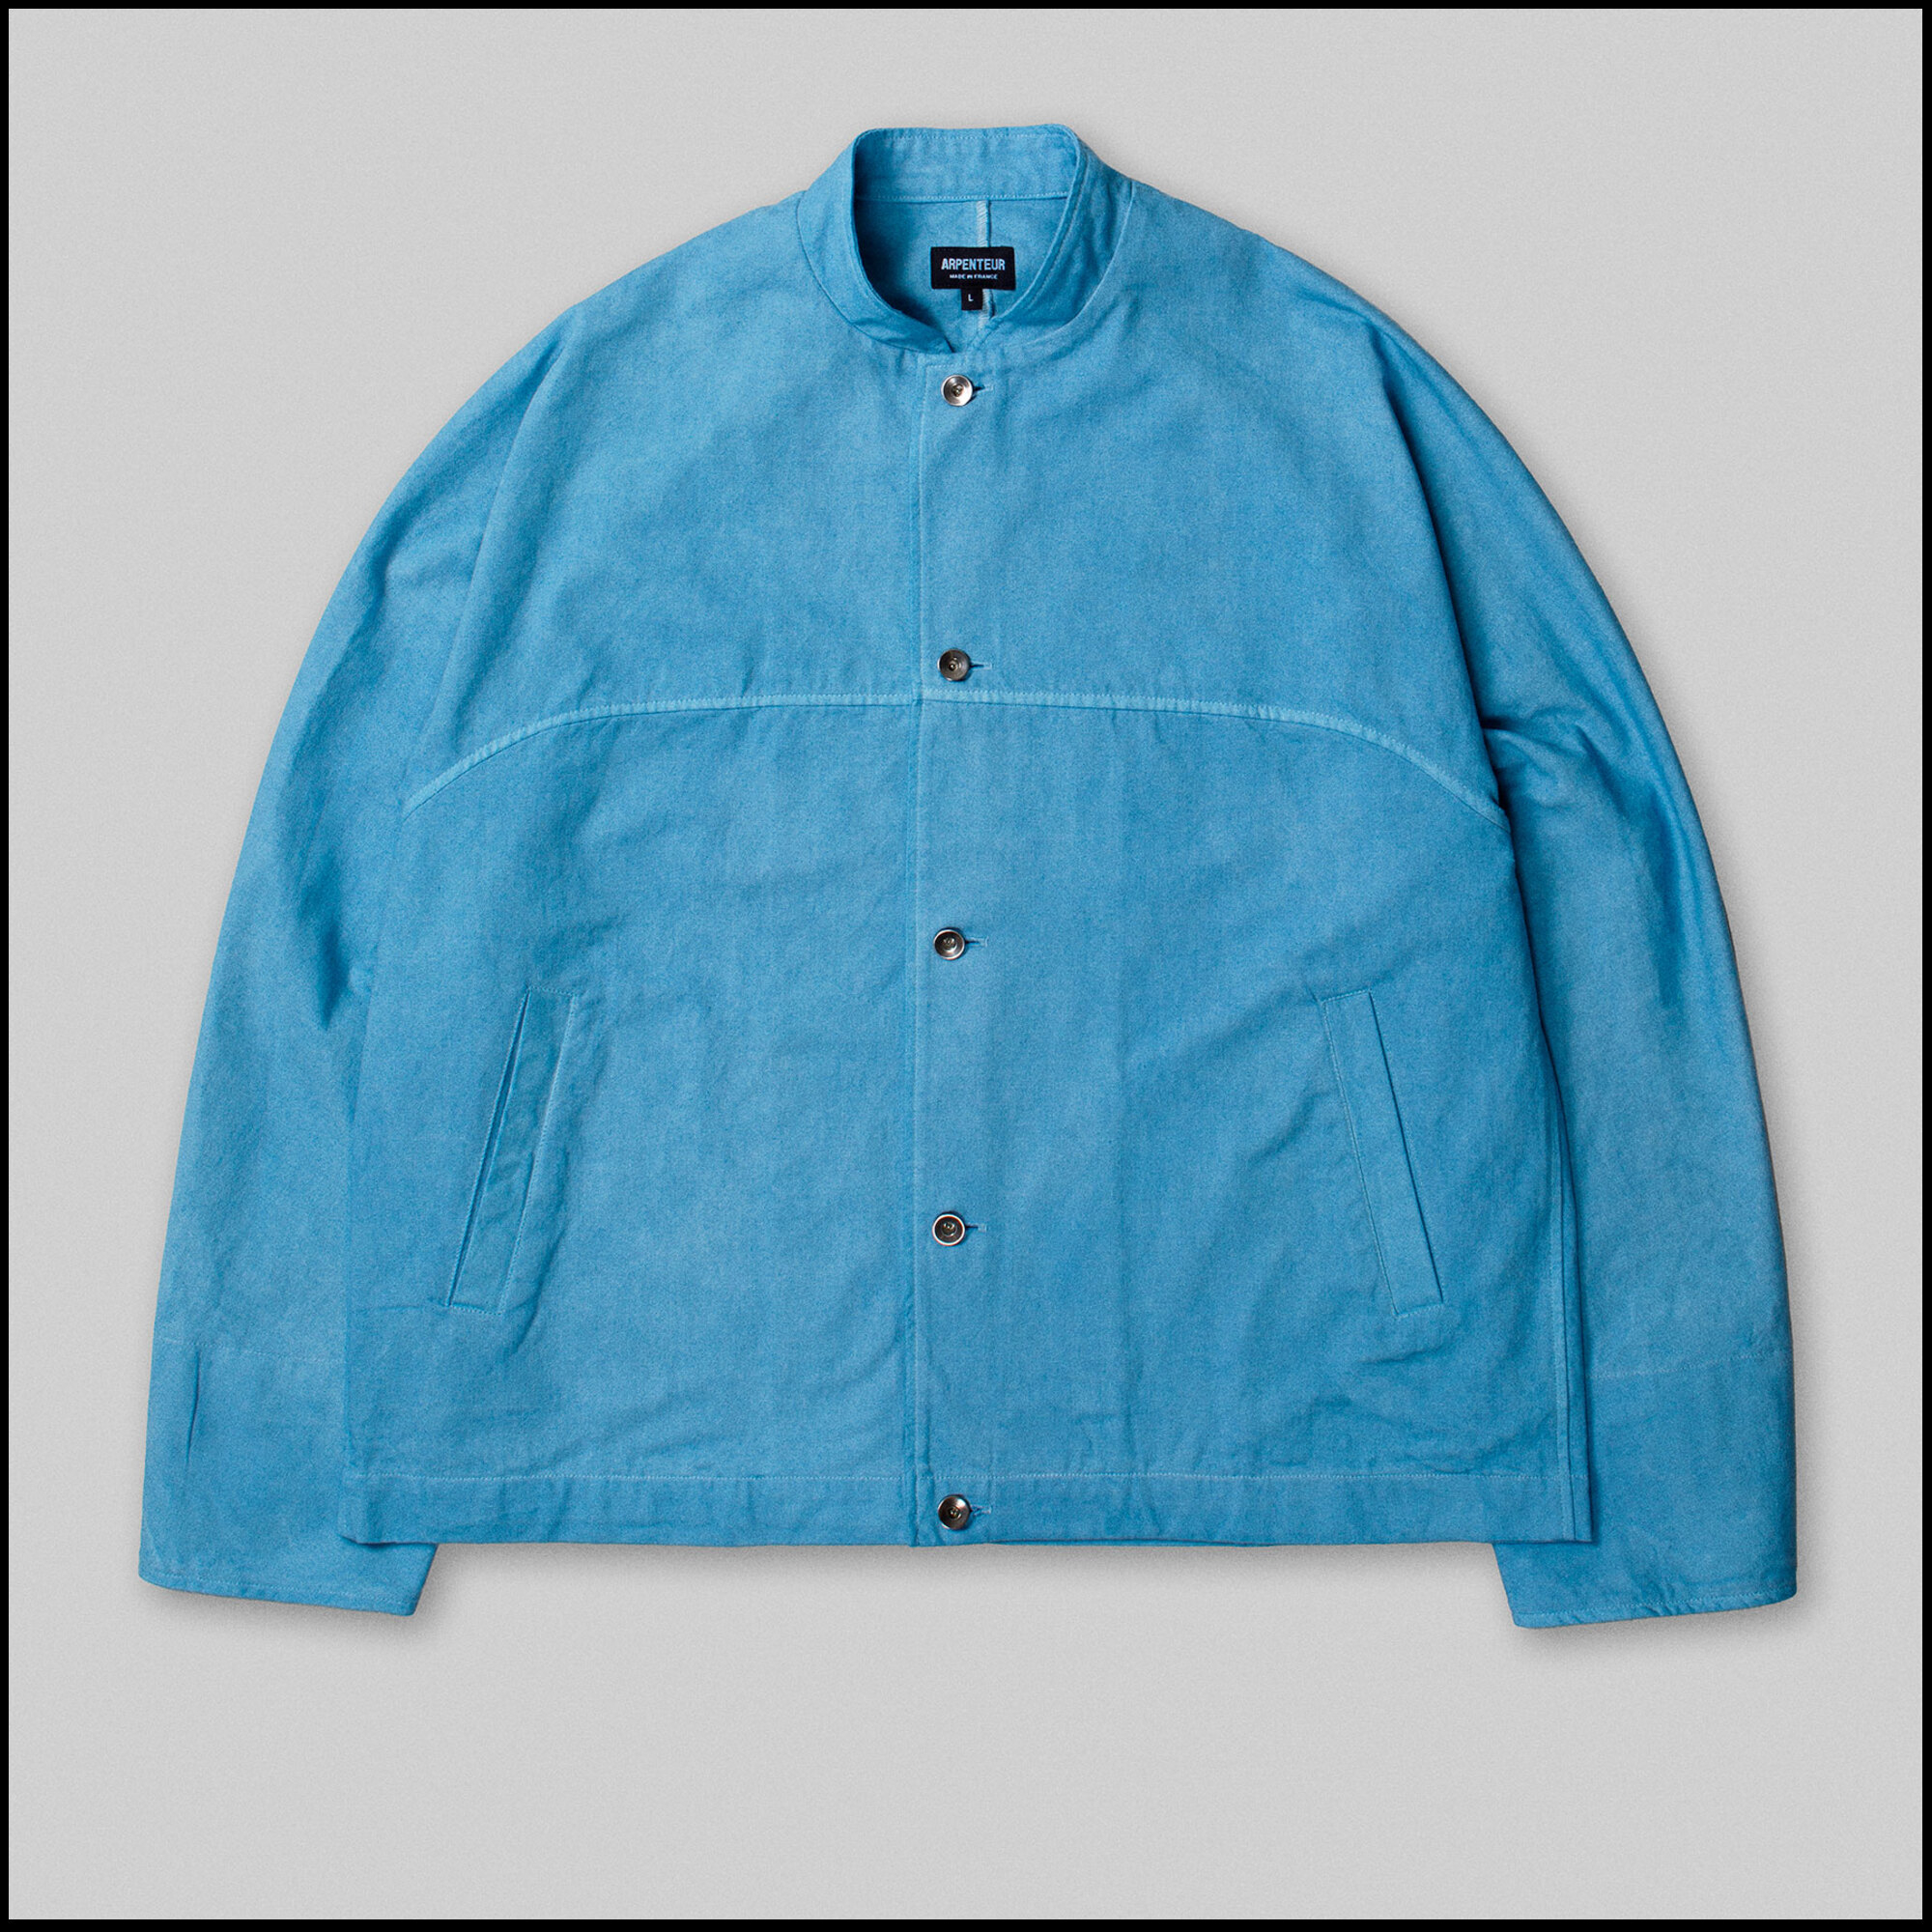 EVO Jacket by Arpenteur in Ice woad color